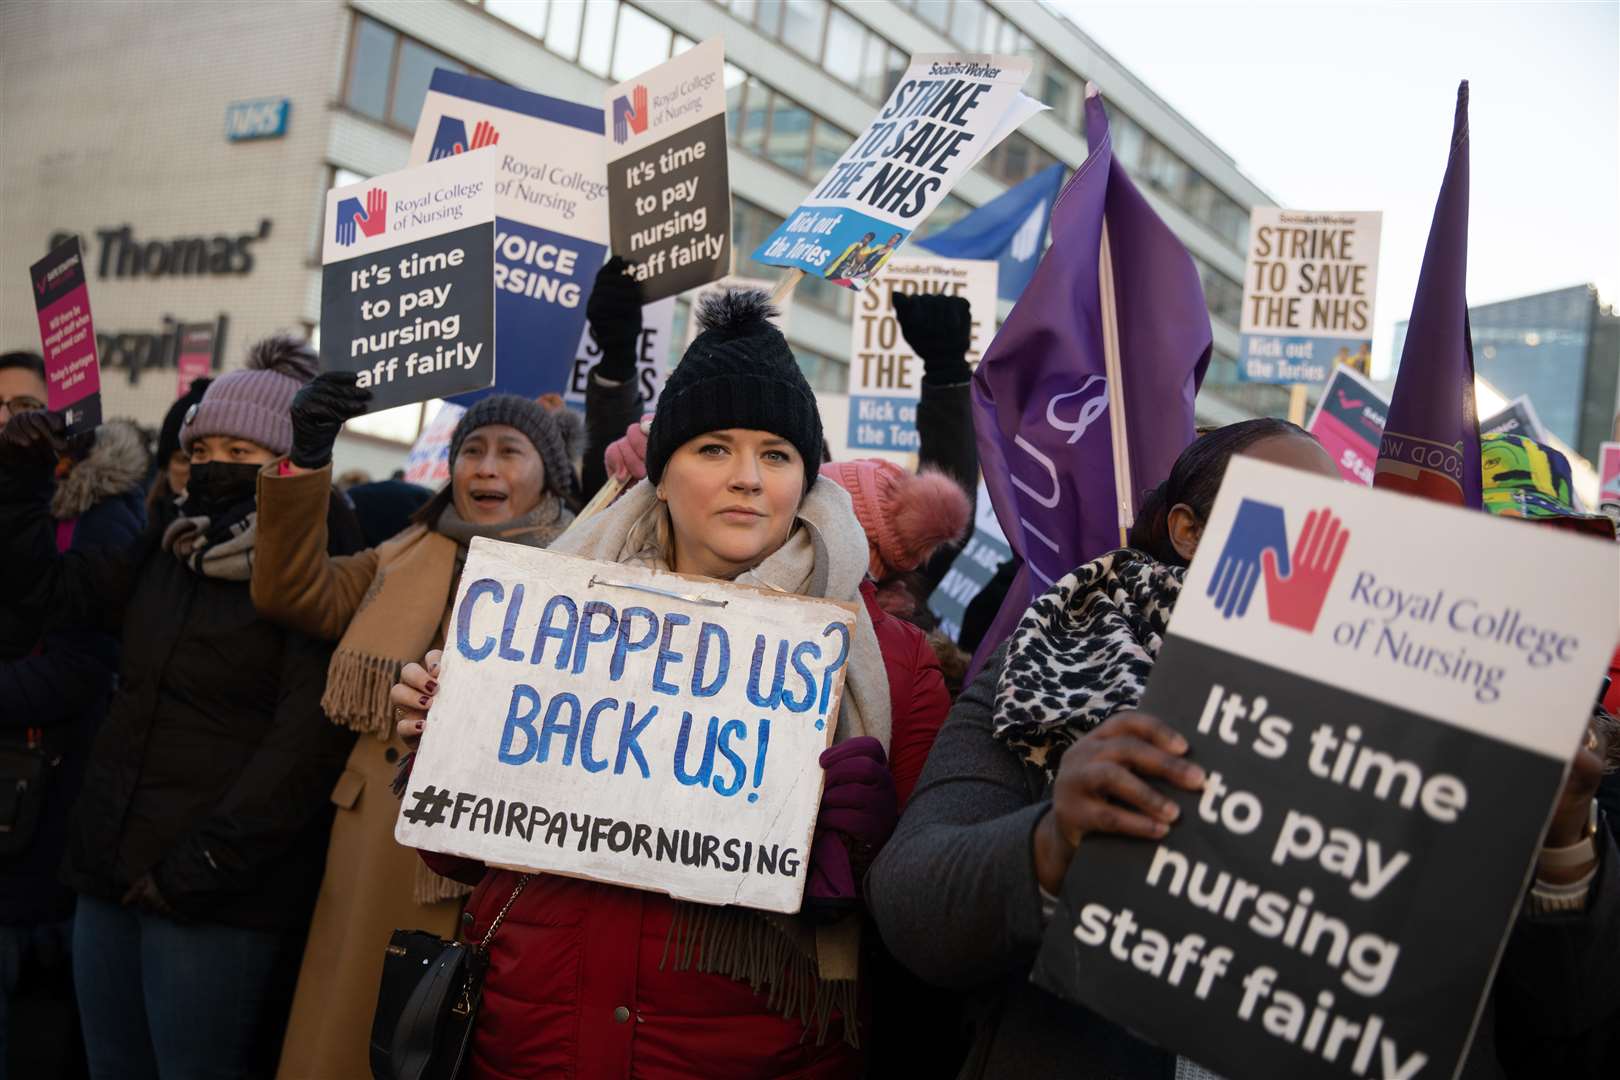 The ambulance strike comes after nurses staged their biggest-ever strike in the history of the NHS (Lucy North/PA)